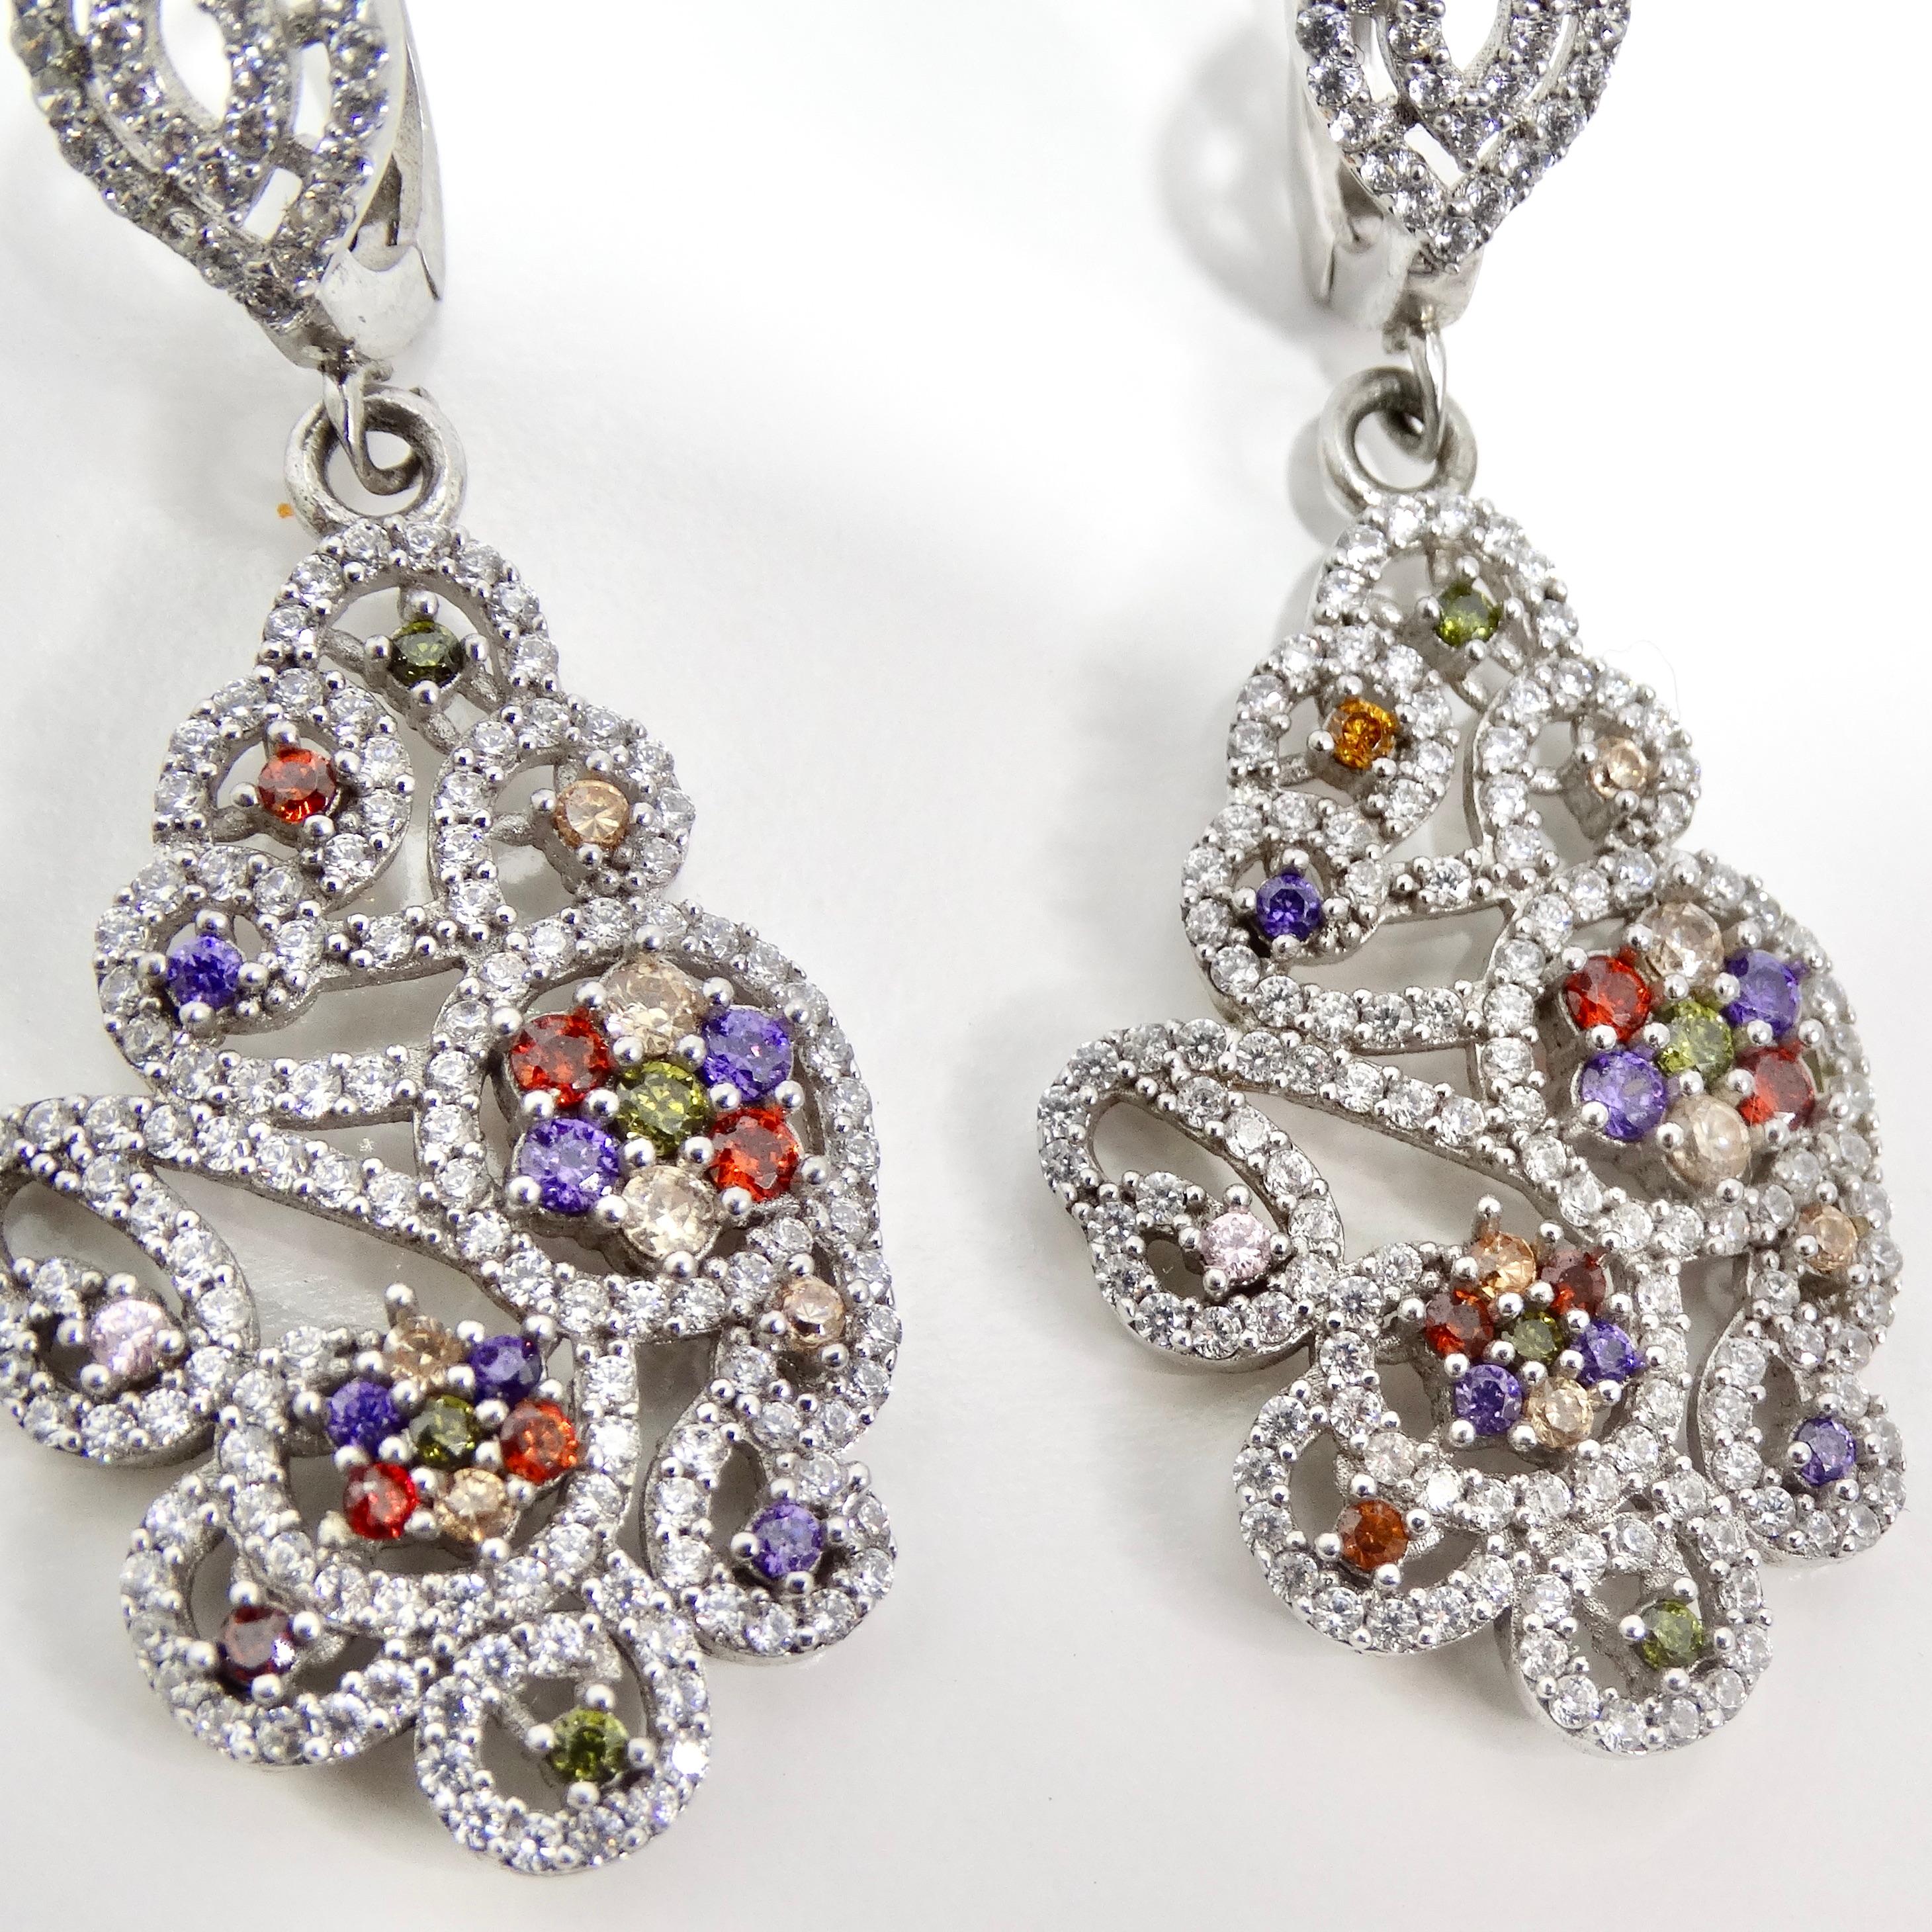 1990s Multicolor Swarovski Crystal Dangle Earrings In Excellent Condition For Sale In Scottsdale, AZ